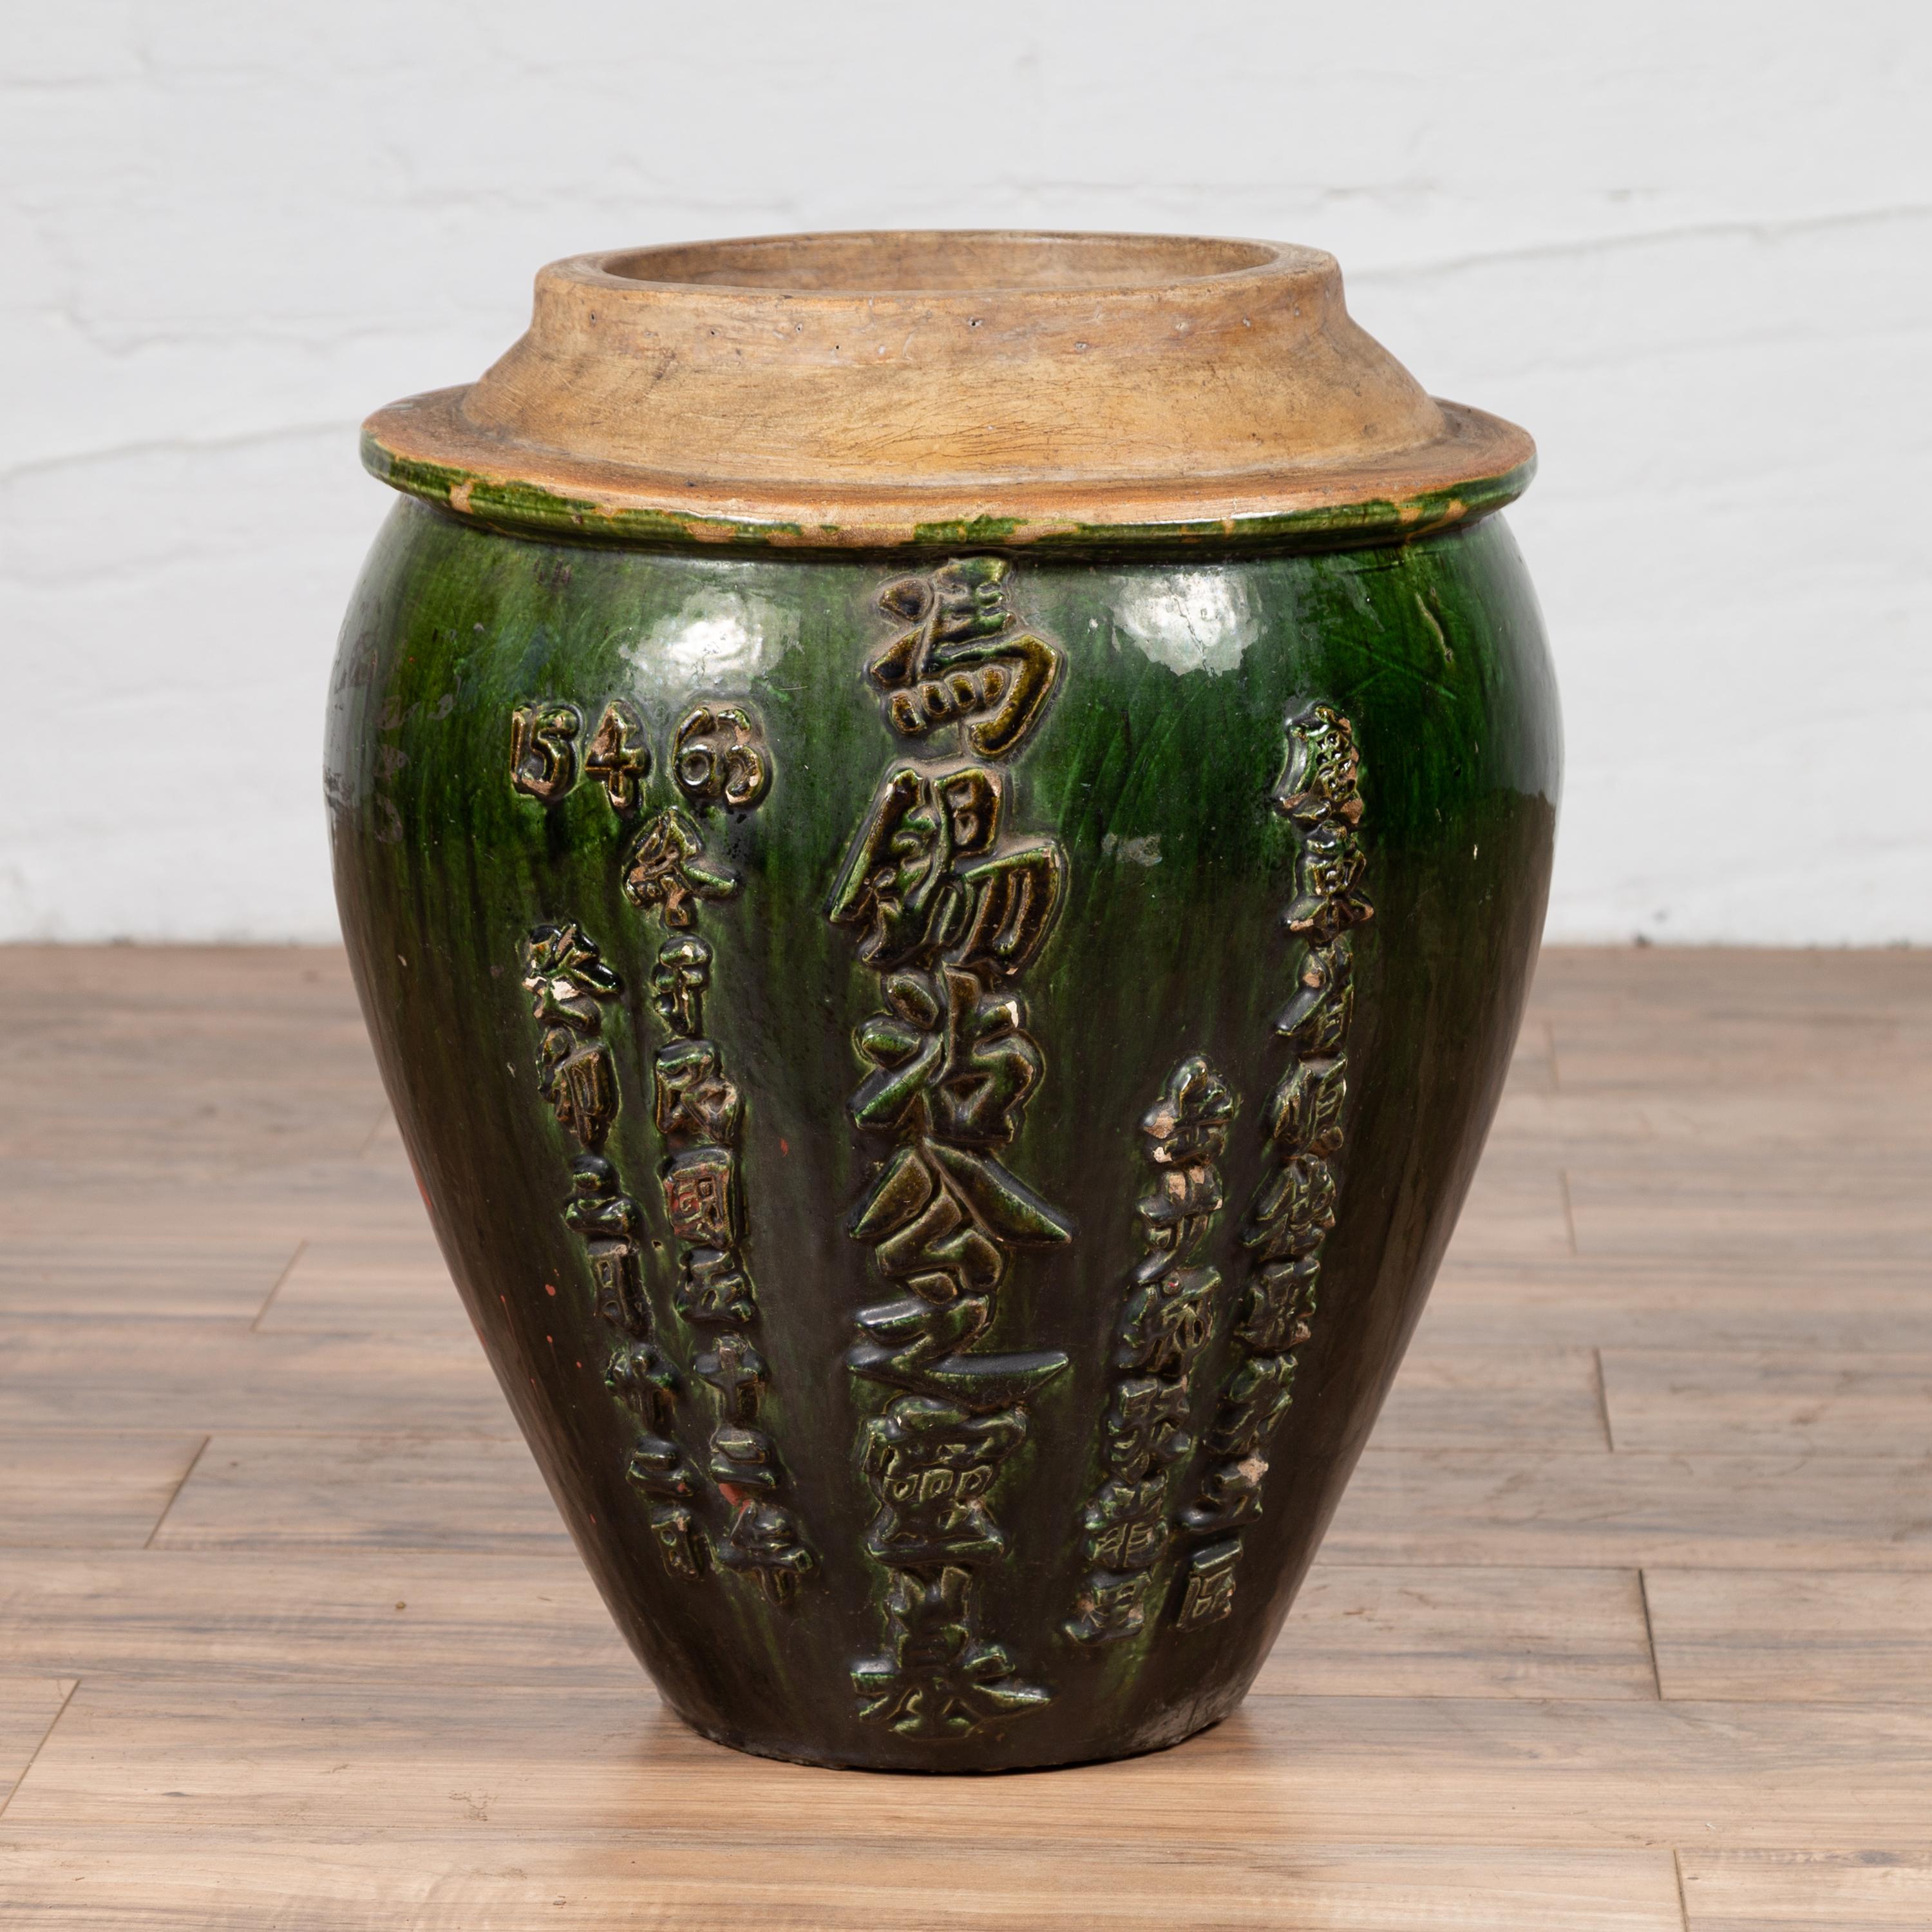 A Chinese green glazed water jug with unusual design and calligraphy. Born in China, this green glazed water jug captivates with its striking design and artistic elegance. The jug features a richly hued green glazed body, topped by a flaring neck